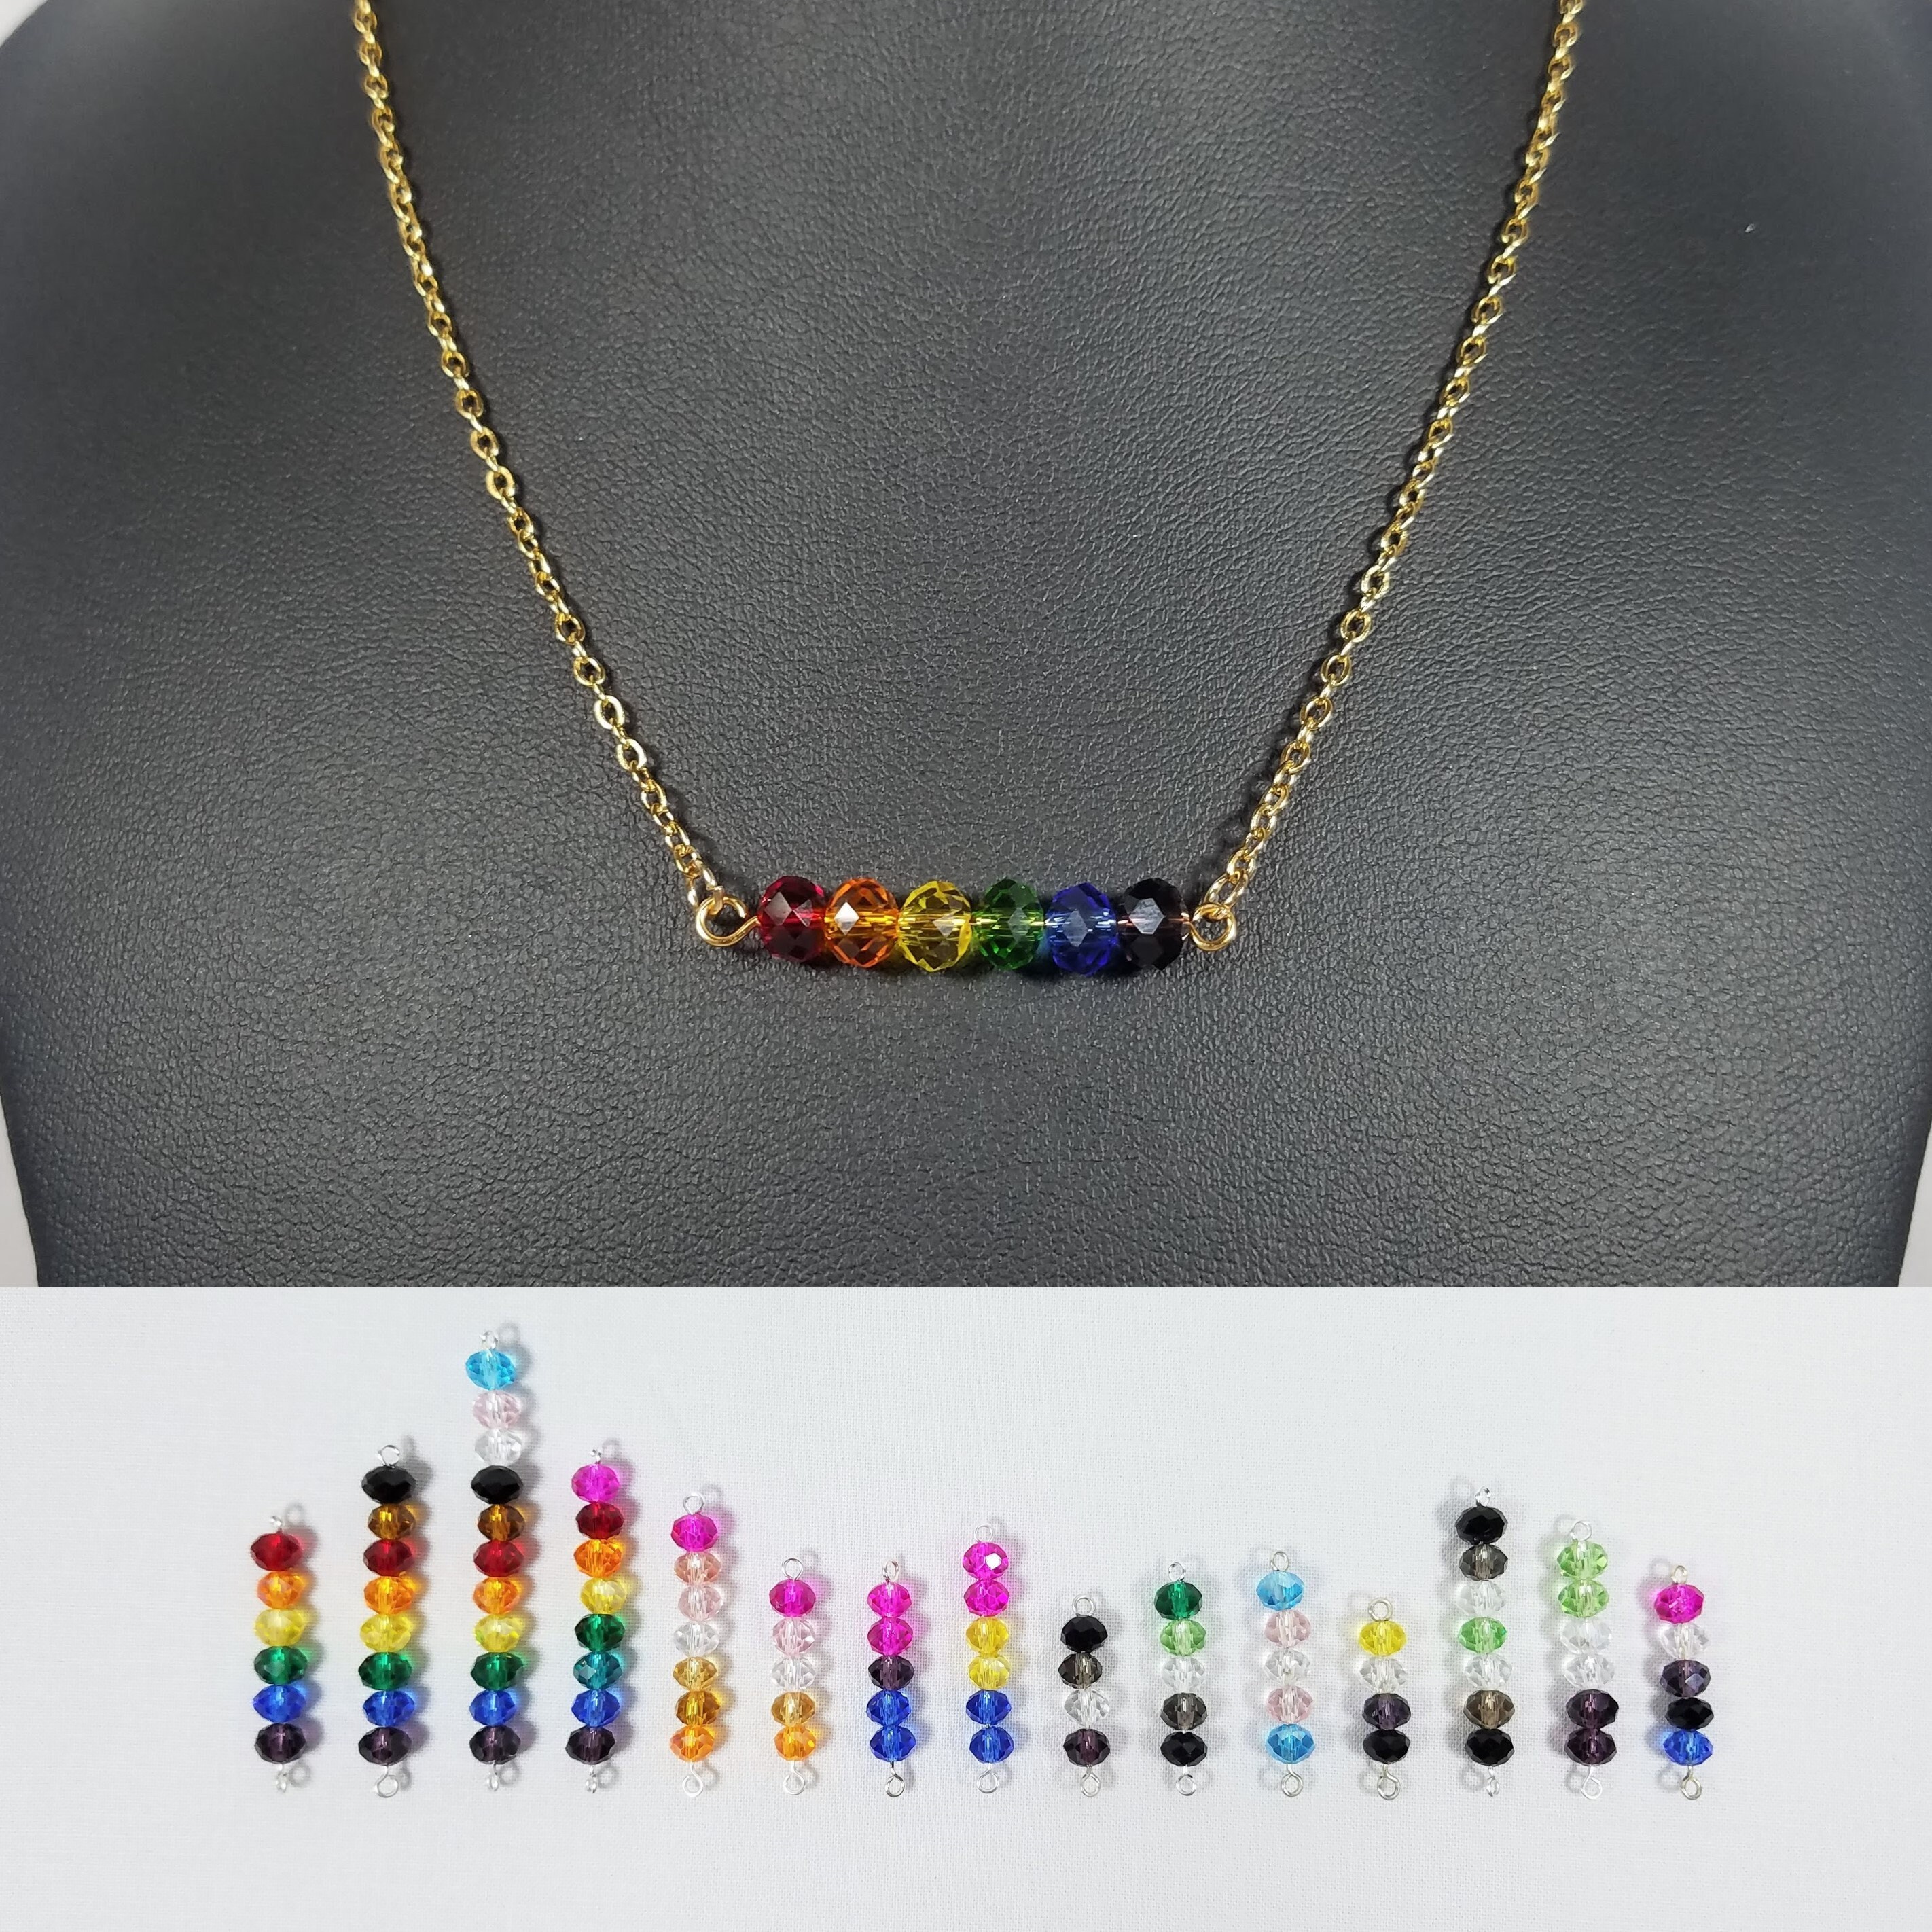 Minimalist Handmade Jewelry Subtle LGBT Present Personalized Charm Pendant Crystal LGBTQ Pride Flag Silver Bar Necklace Coming Out Gift